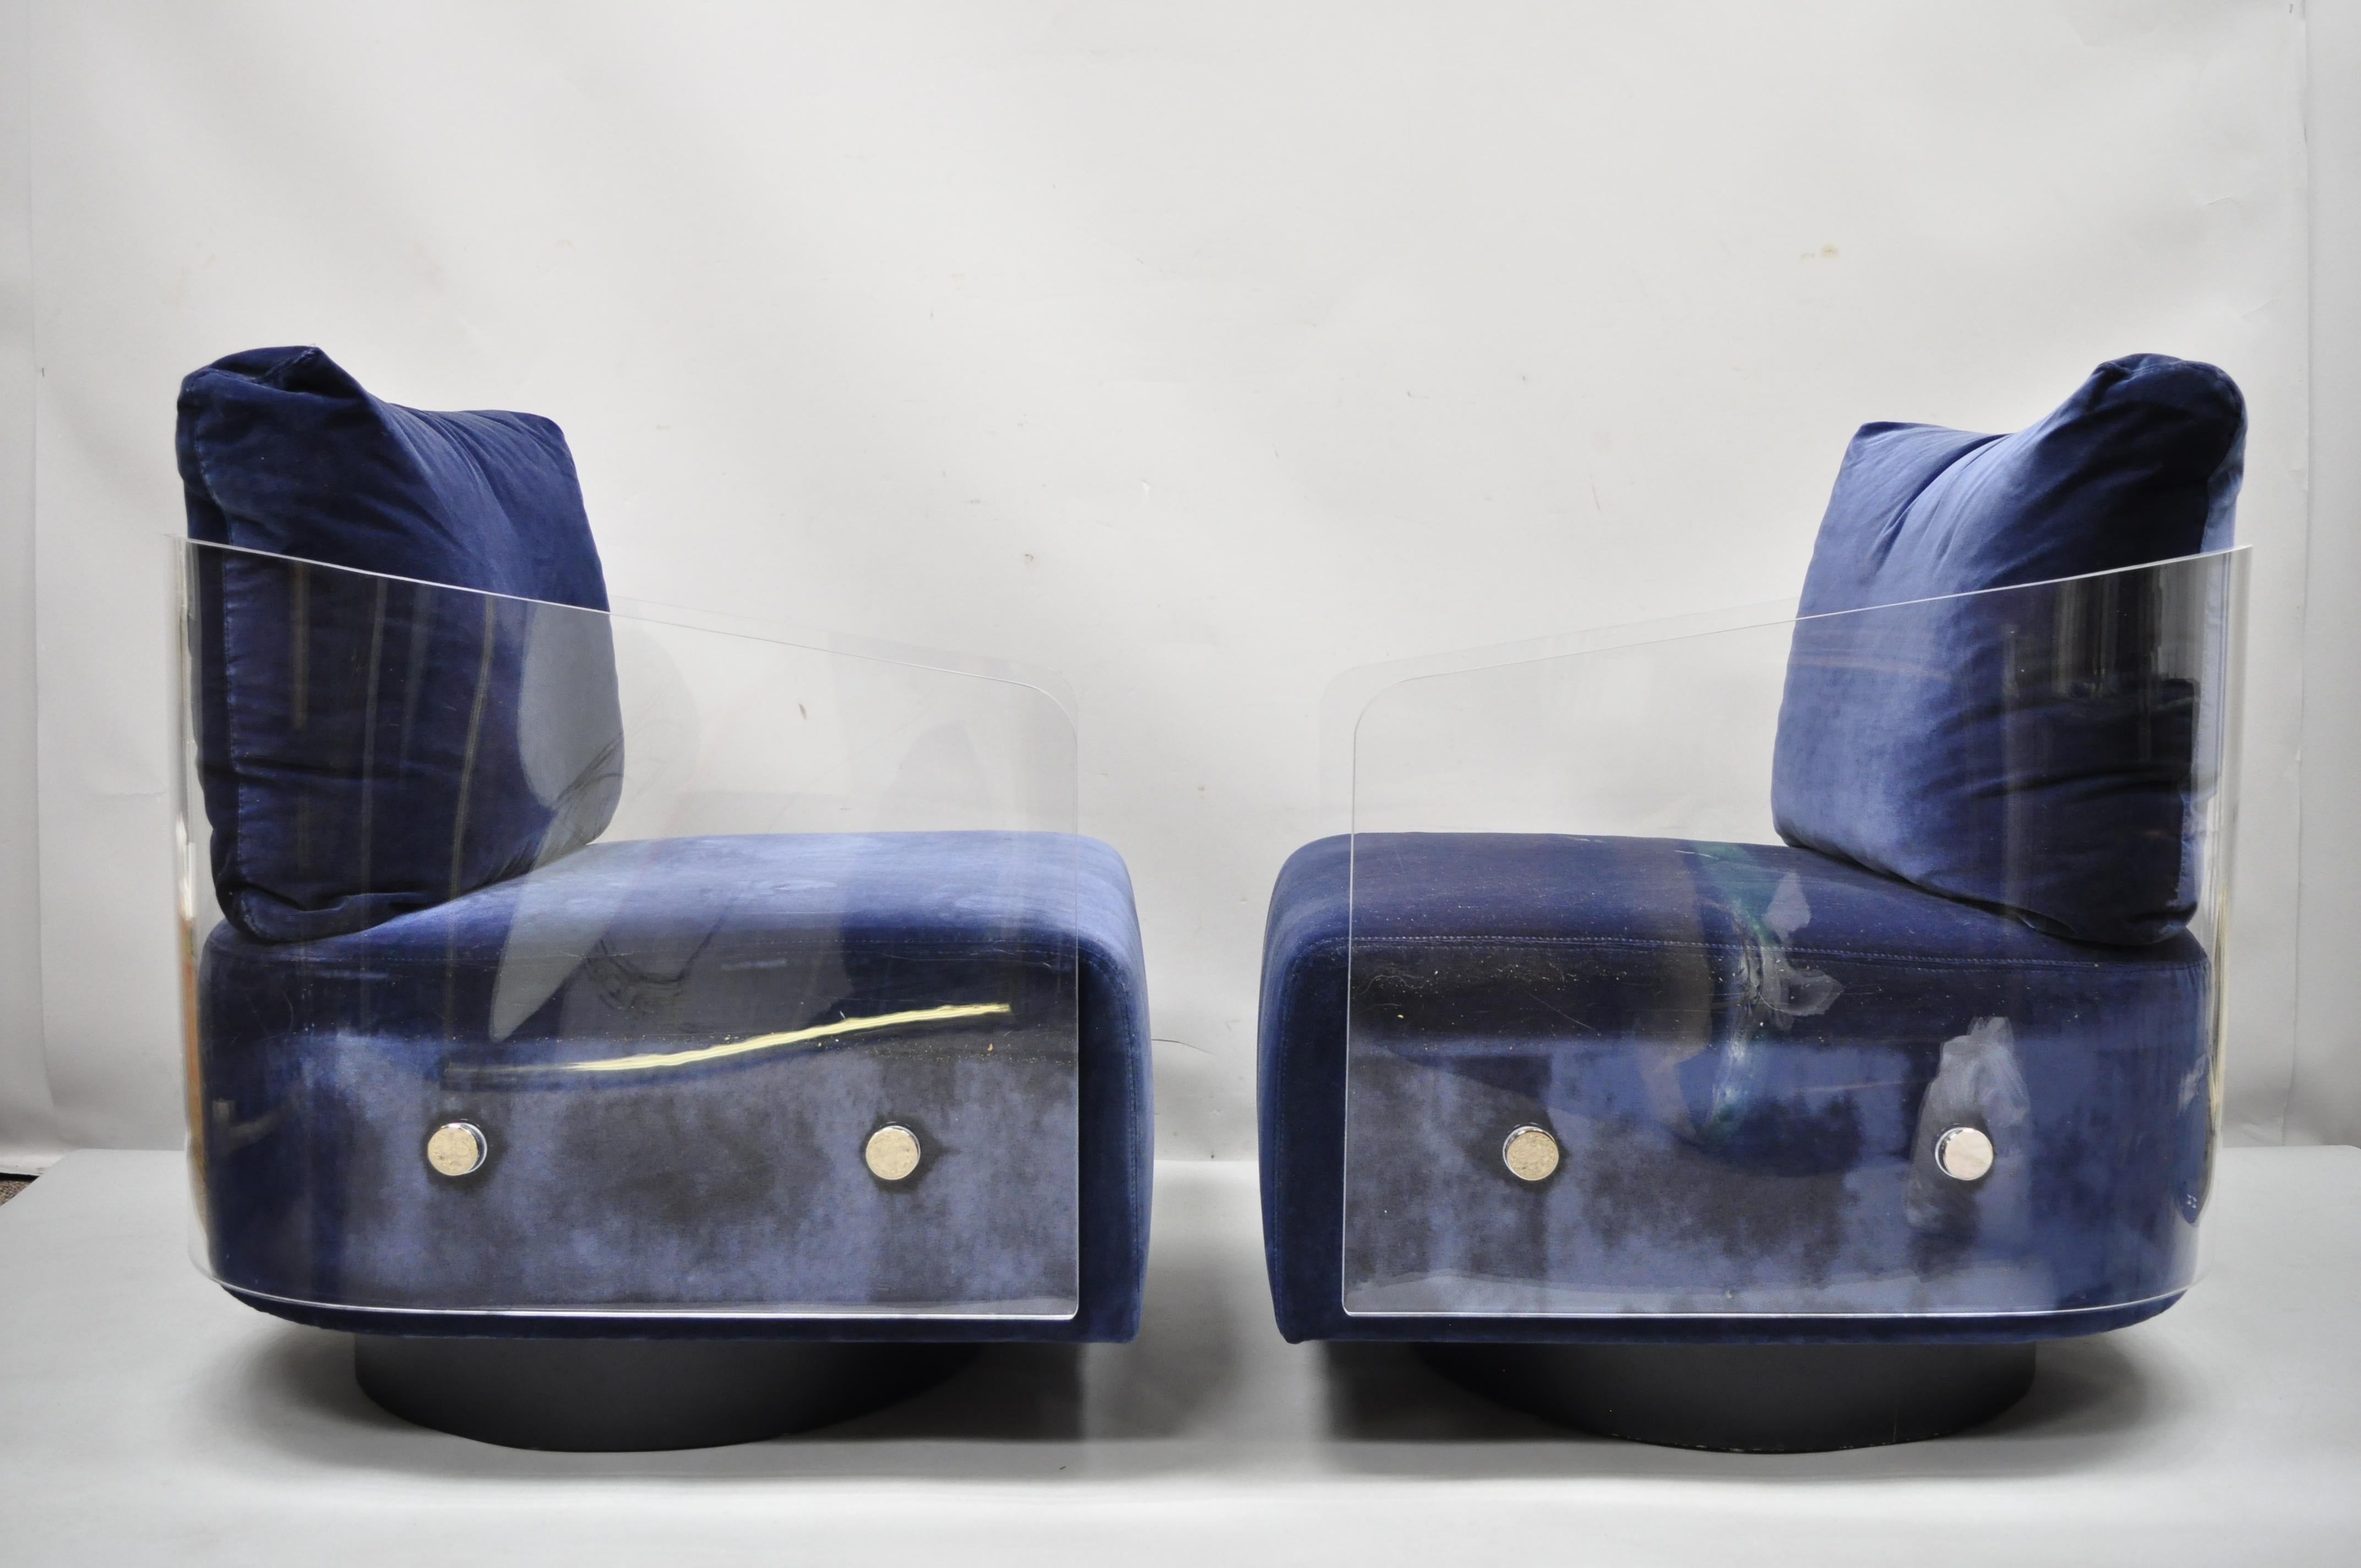 Mitchell Gold & Bob Williams Lucite Lucy swivel blue club lounge chairs - a pair. Item 1970s inspired, thick heavy lucite construction, black round swivel pedestal base, blue upholstery, original label, very nice pair, quality American